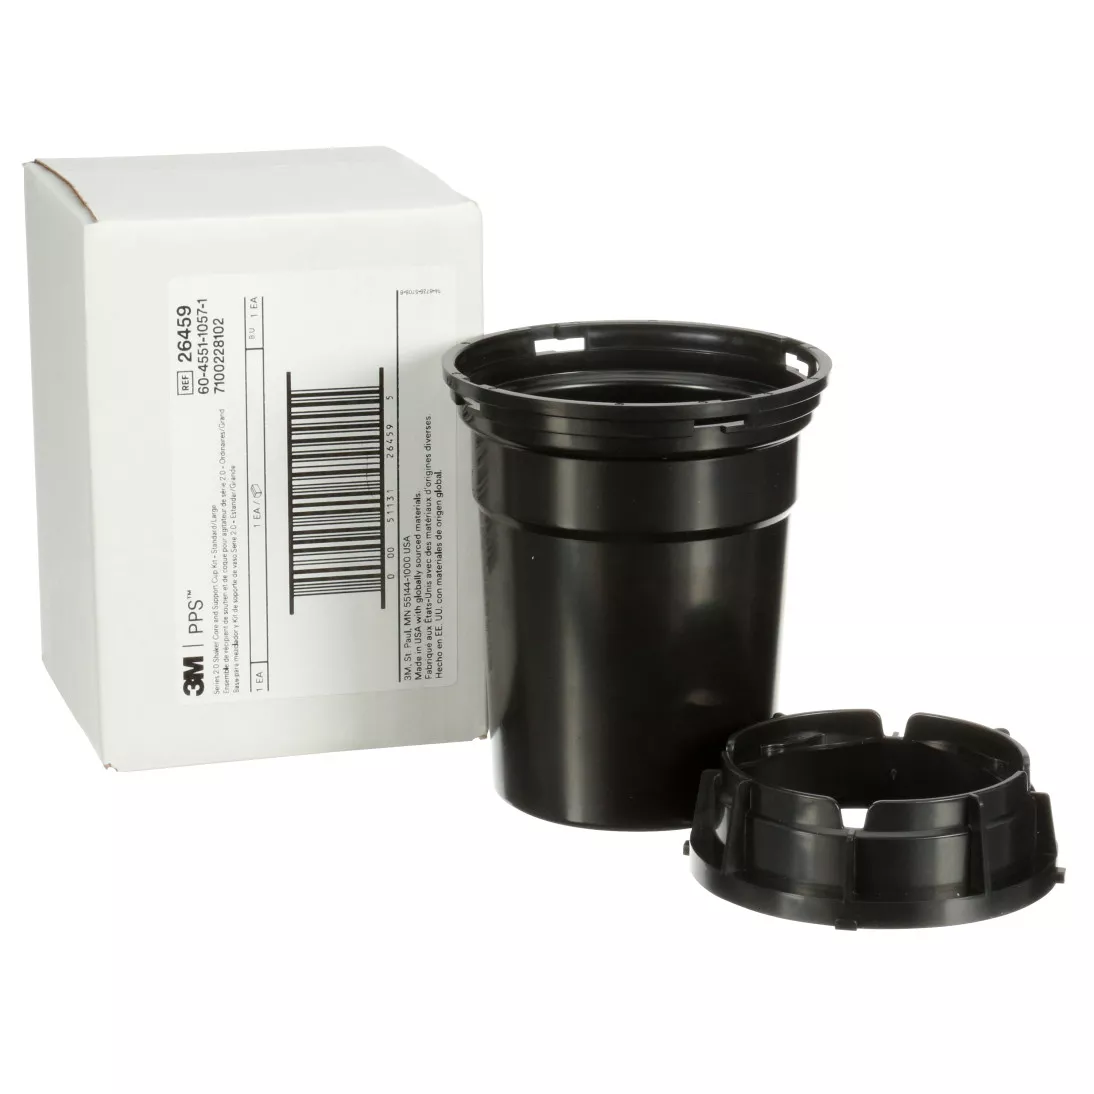 3M™ PPS™ Series 2.0 Shaker Core and Support Cup Kit 26459,
Standard/Large, 1/Case